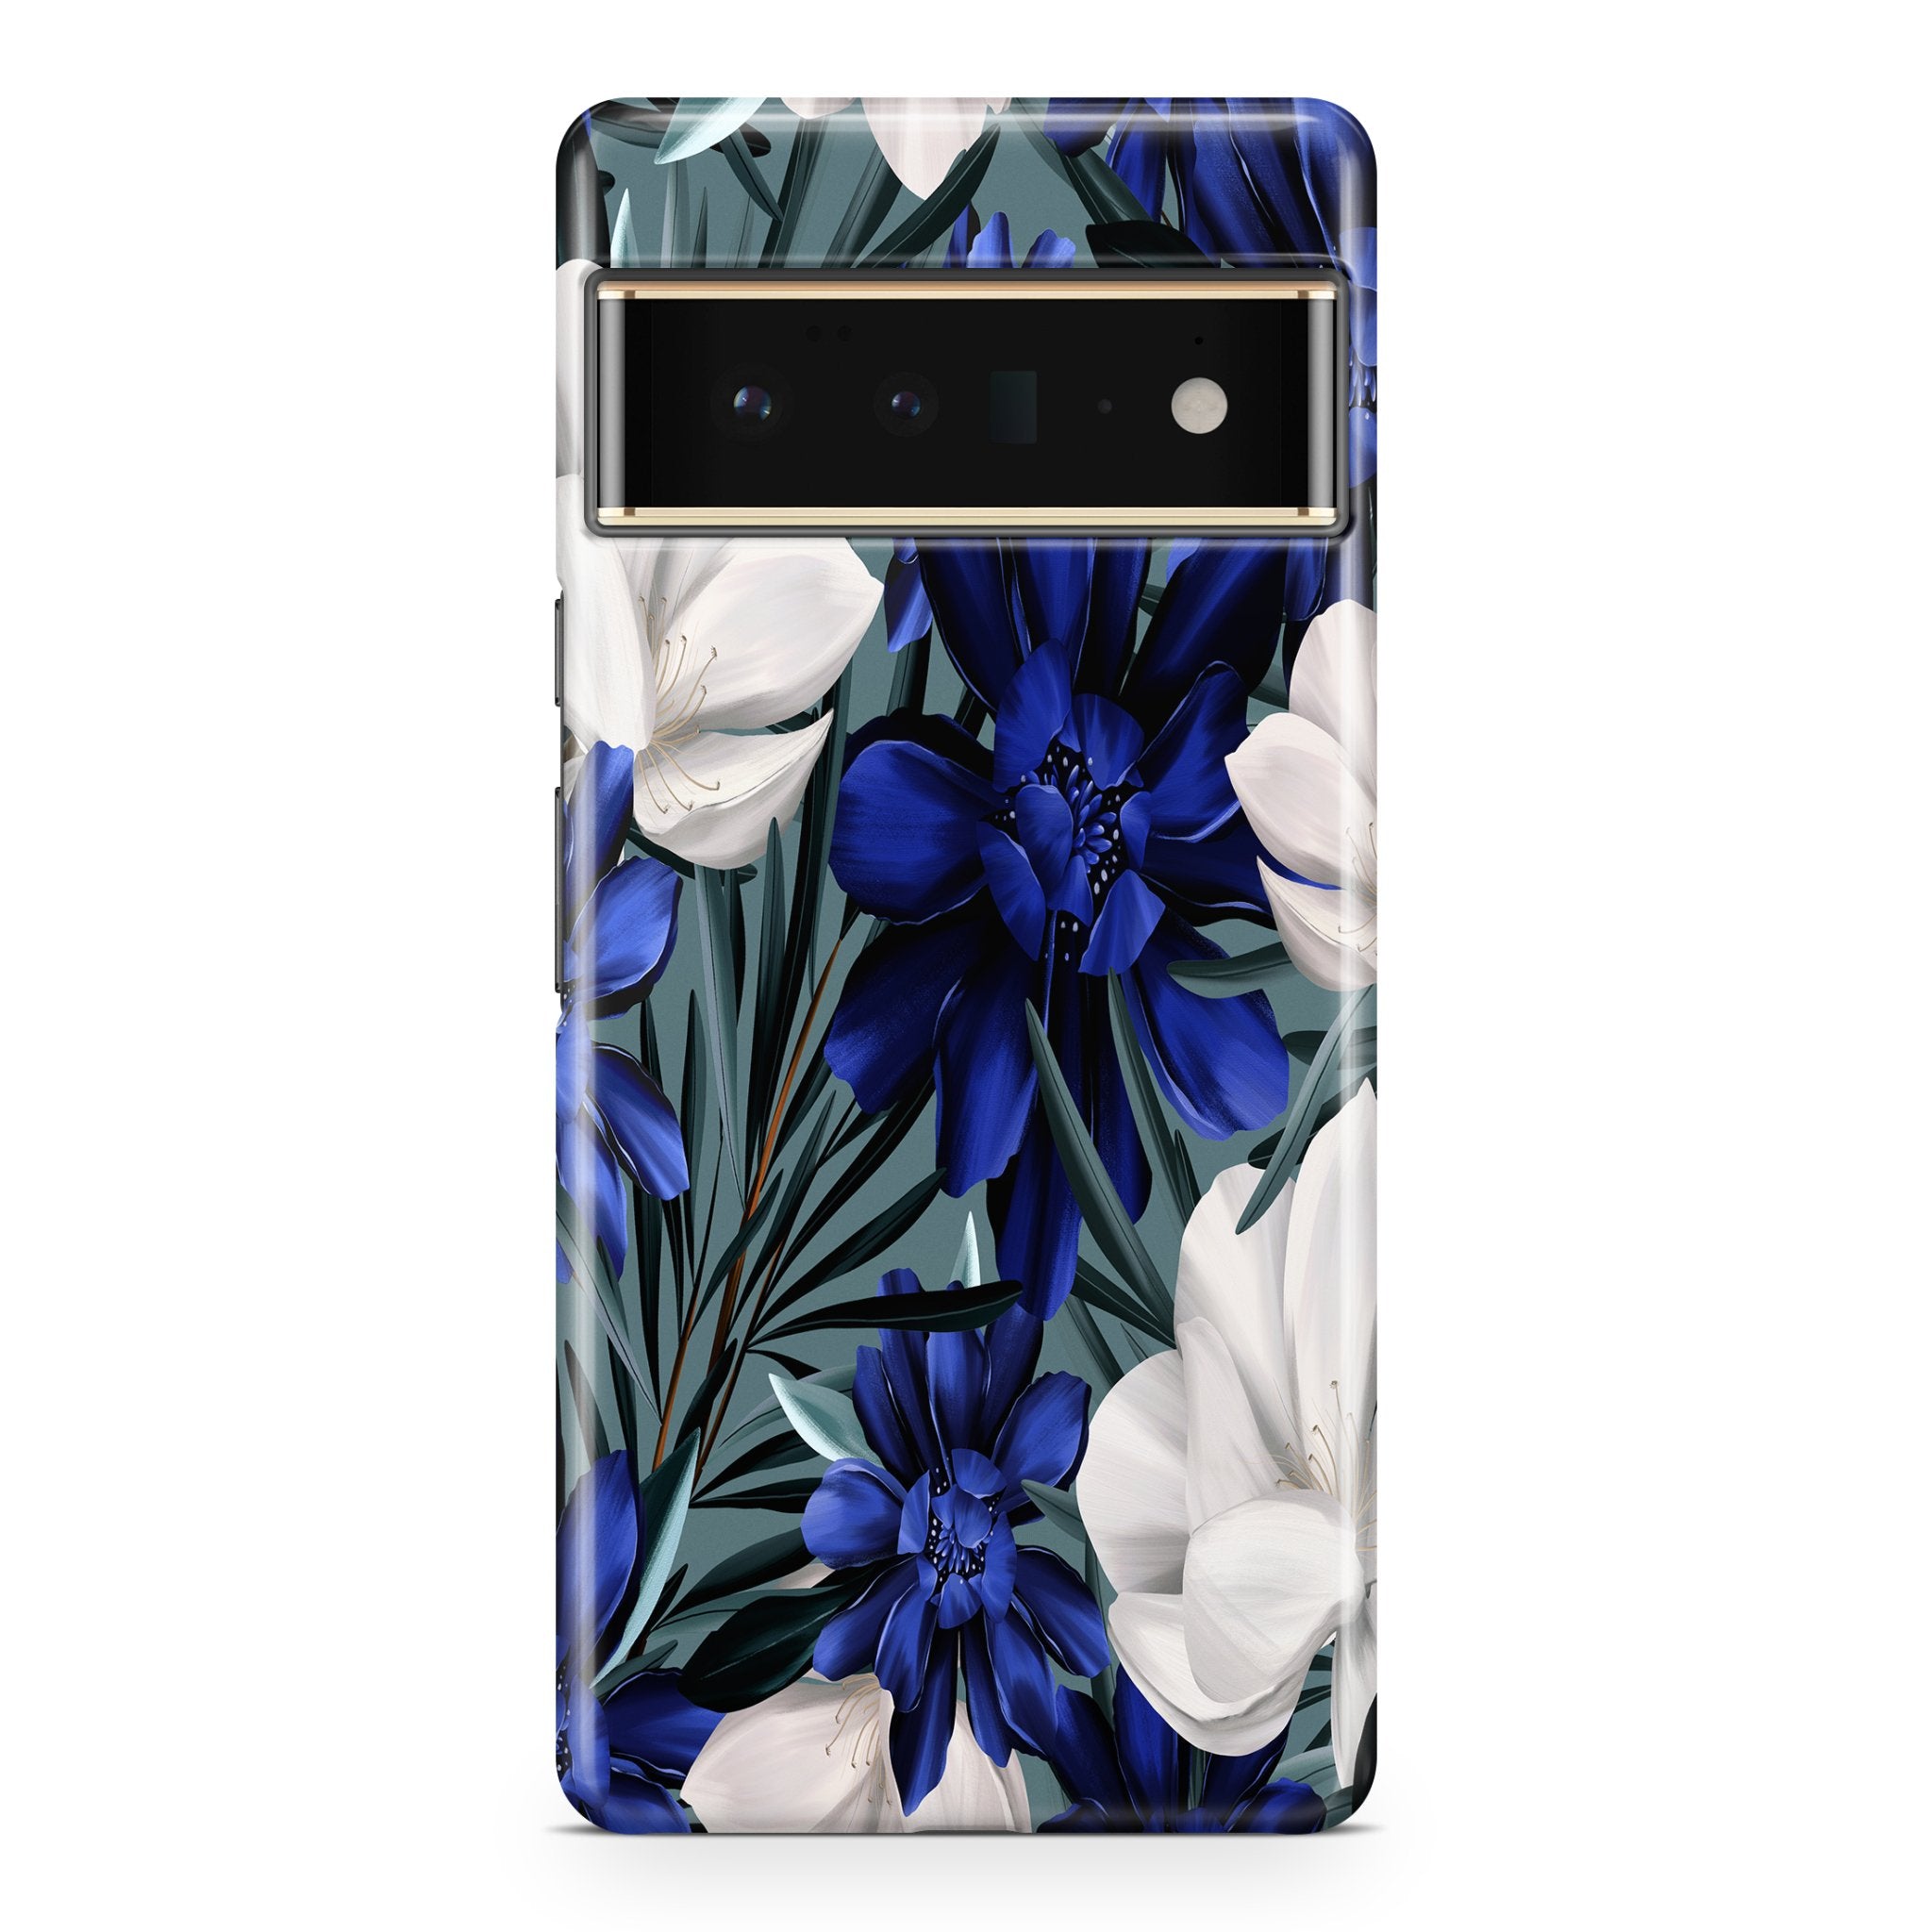 Blue Floral - Google phone case designs by CaseSwagger